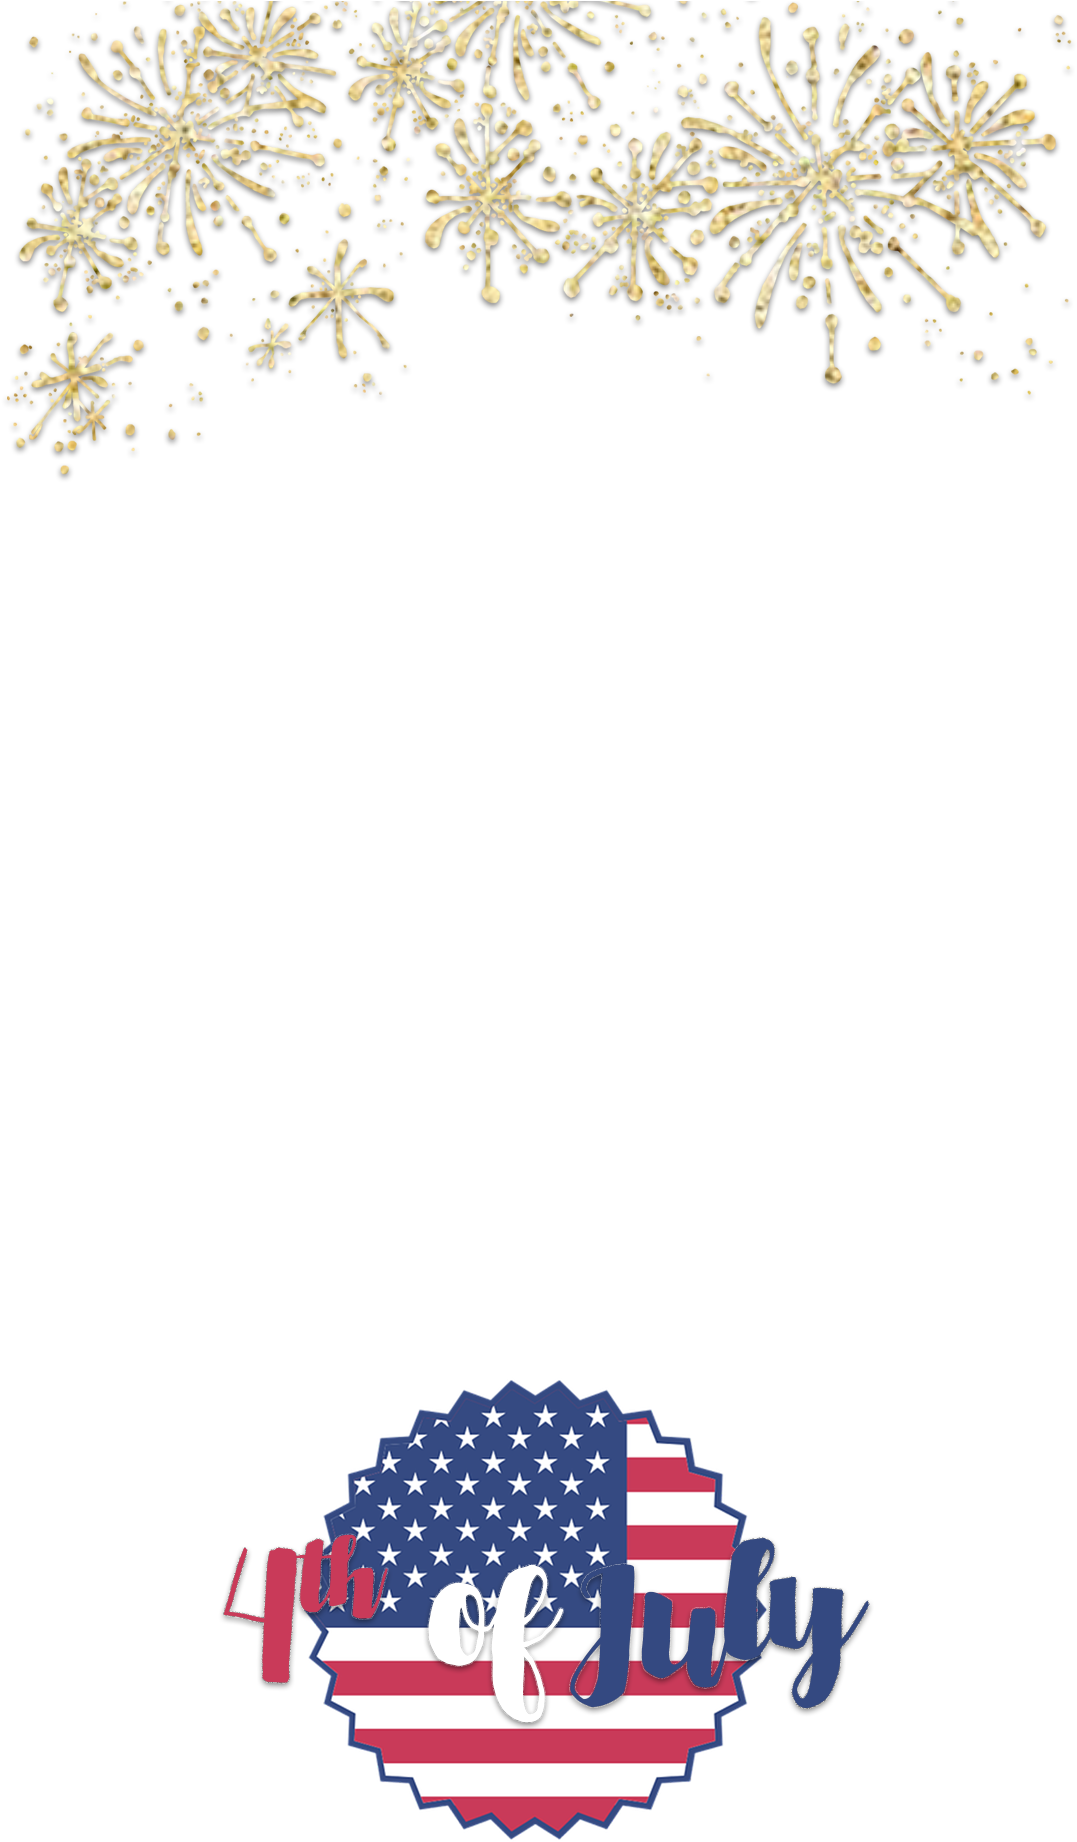 4thof July Fireworksand Flag Graphic PNG image